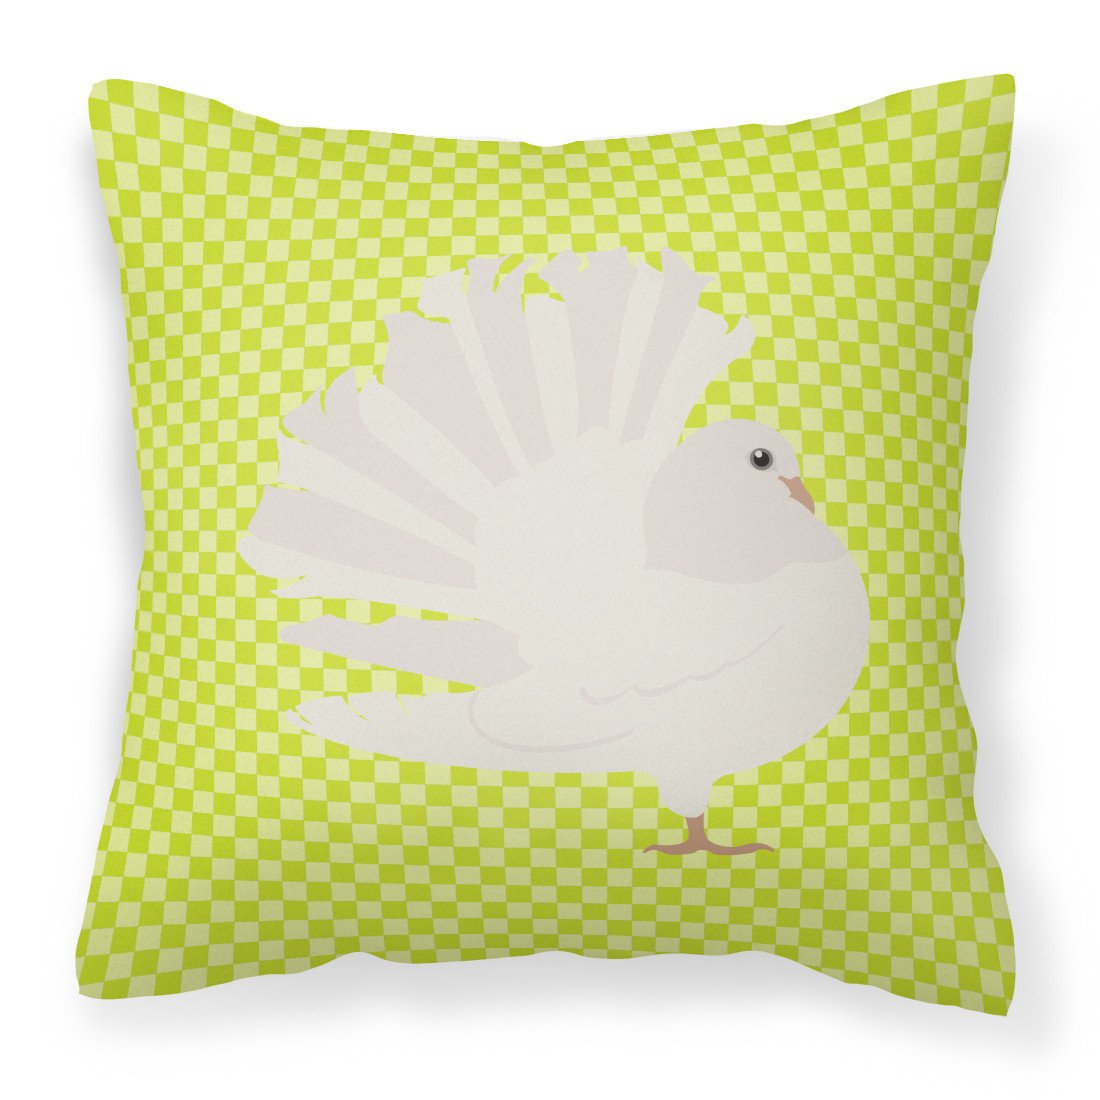 Silver Fantail Pigeon Green Fabric Decorative Pillow BB7776PW1818 by Caroline's Treasures